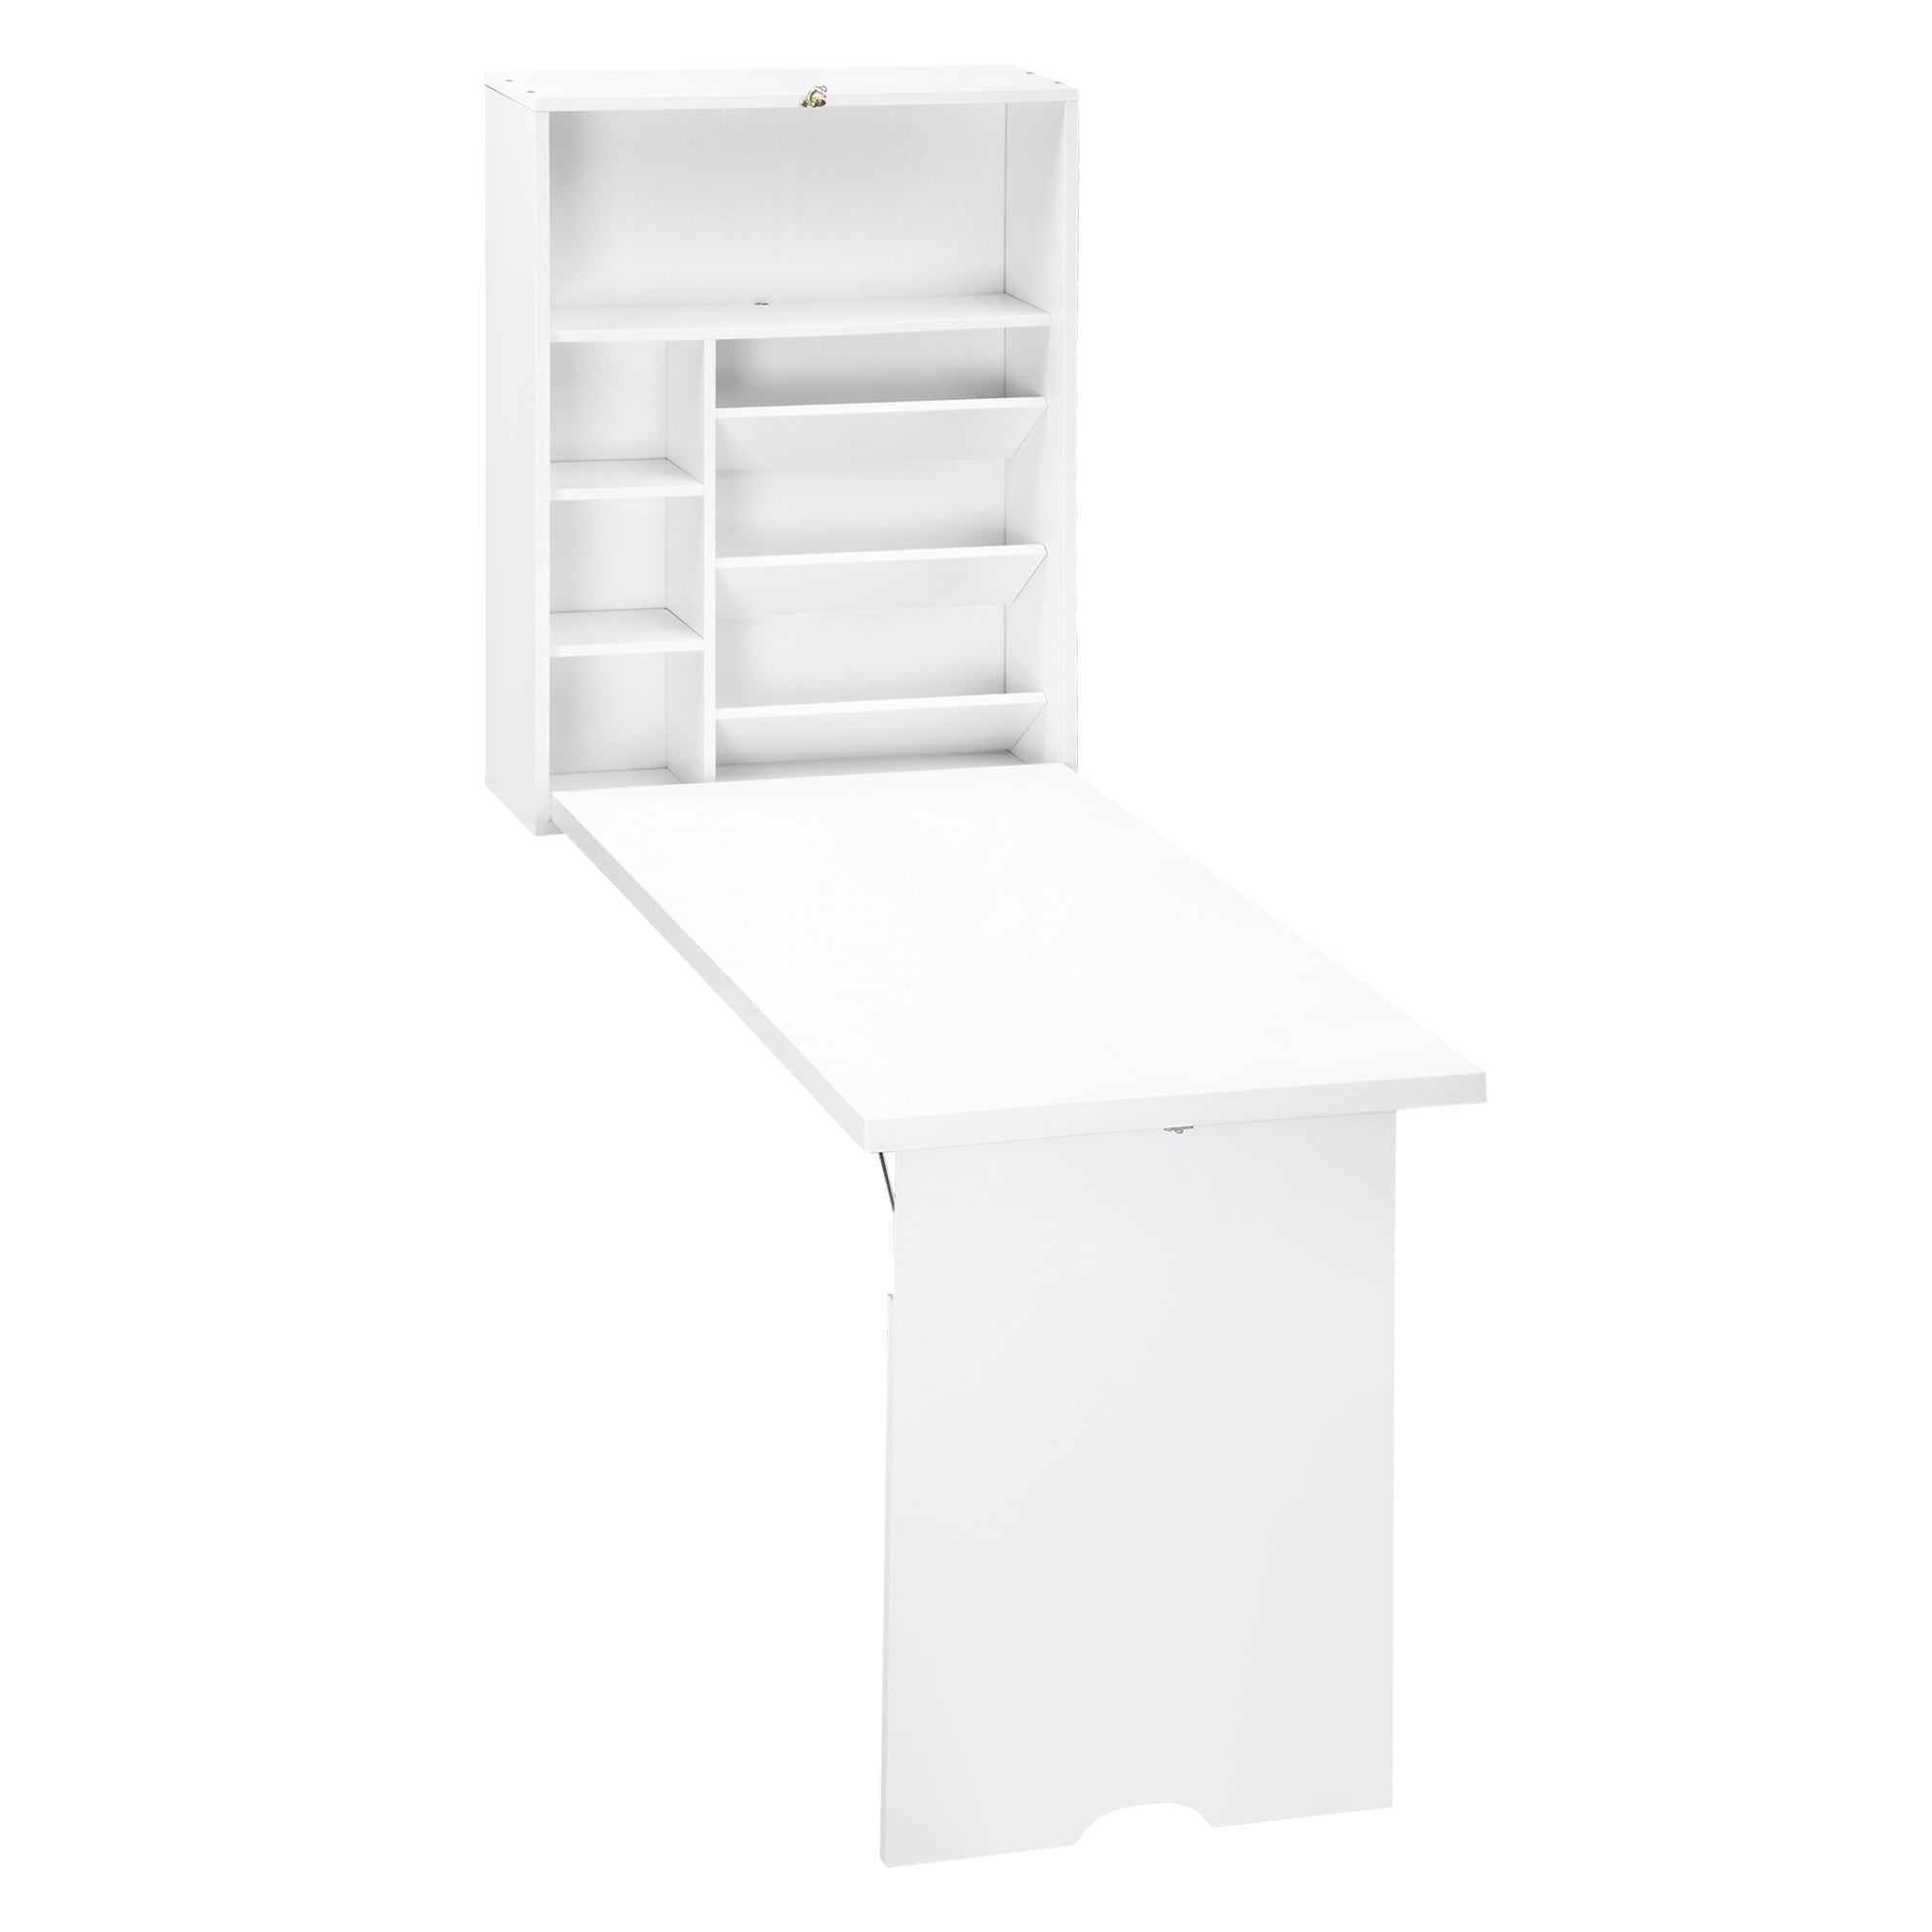 Mount-It! Under Desk Pull-Out Drawer Kit with Shelf MI-7291 B&H